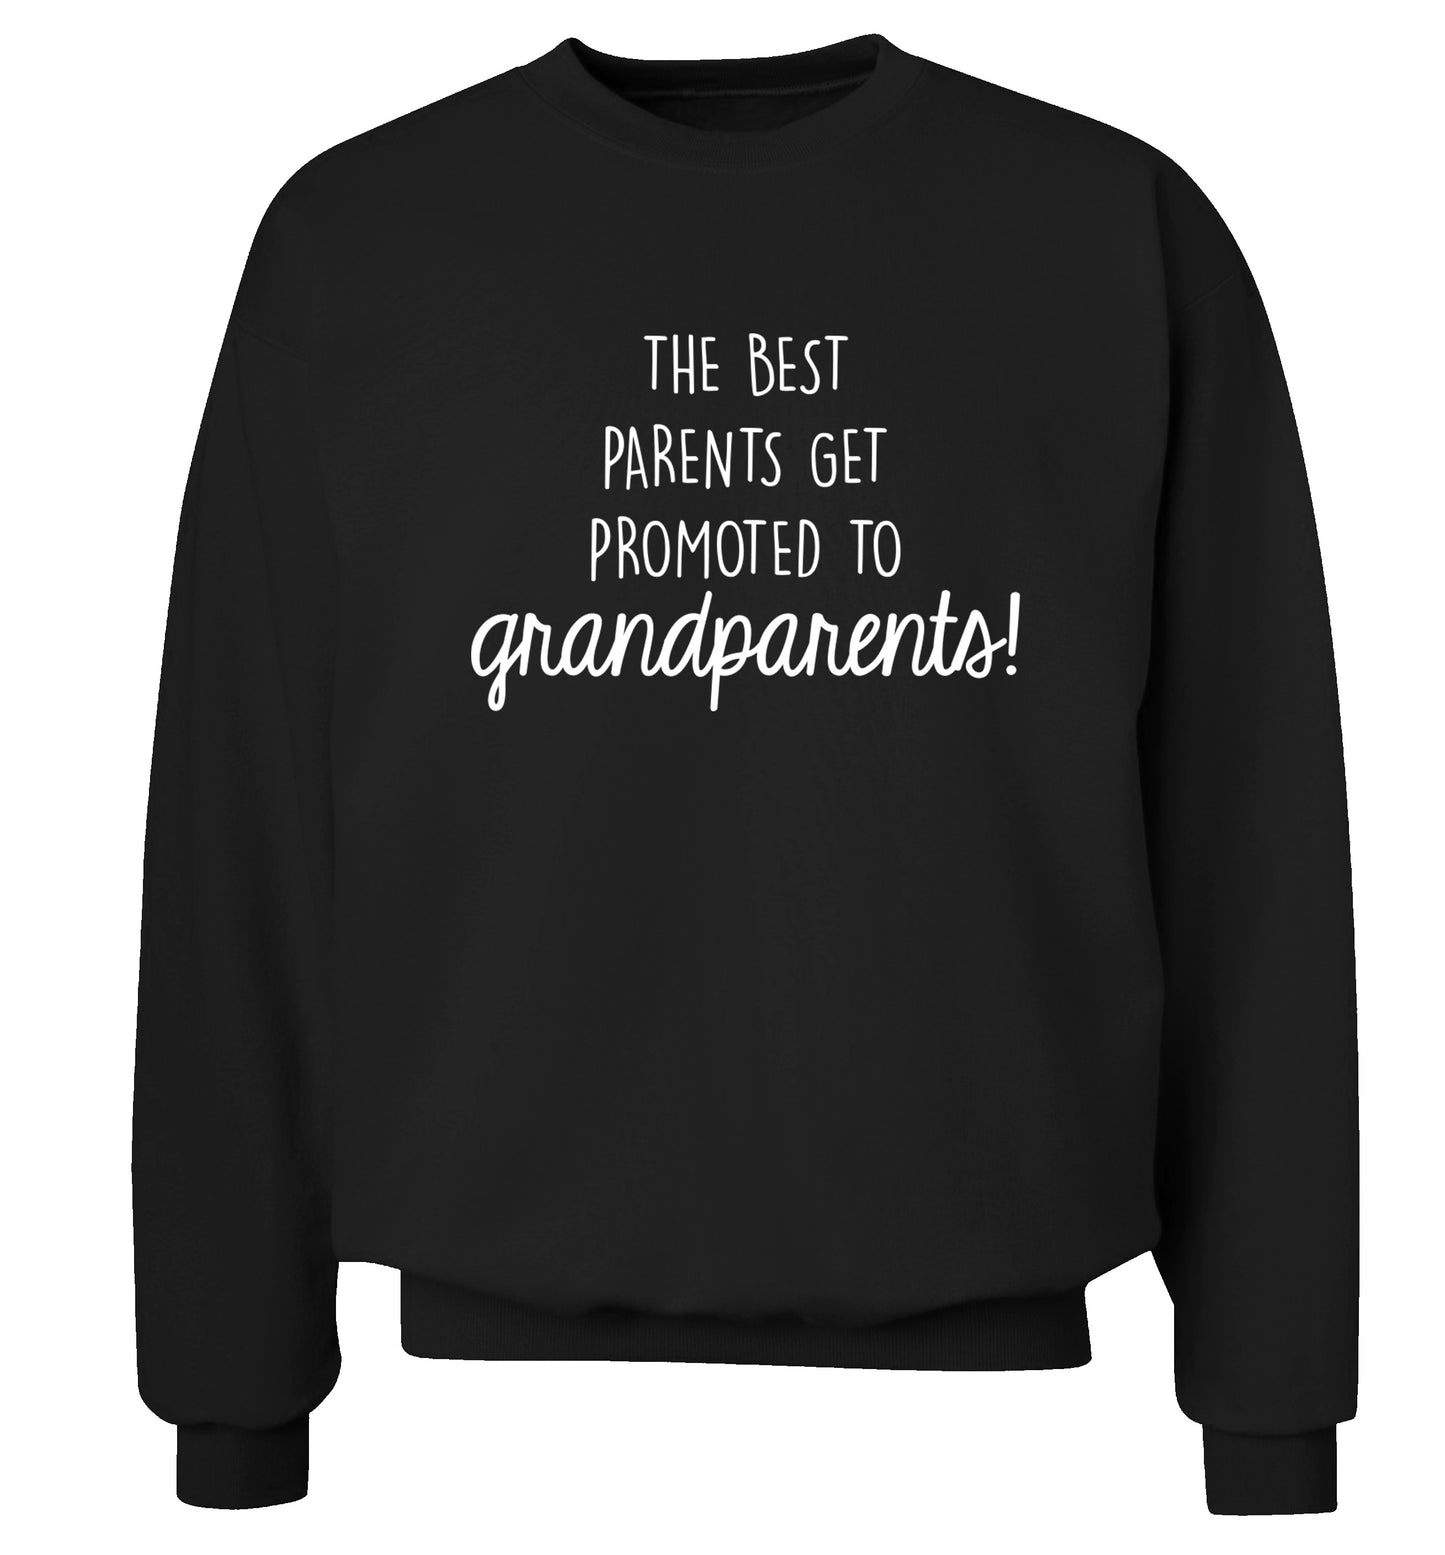 The best parents get promoted to grandparents Adult's unisex black Sweater 2XL